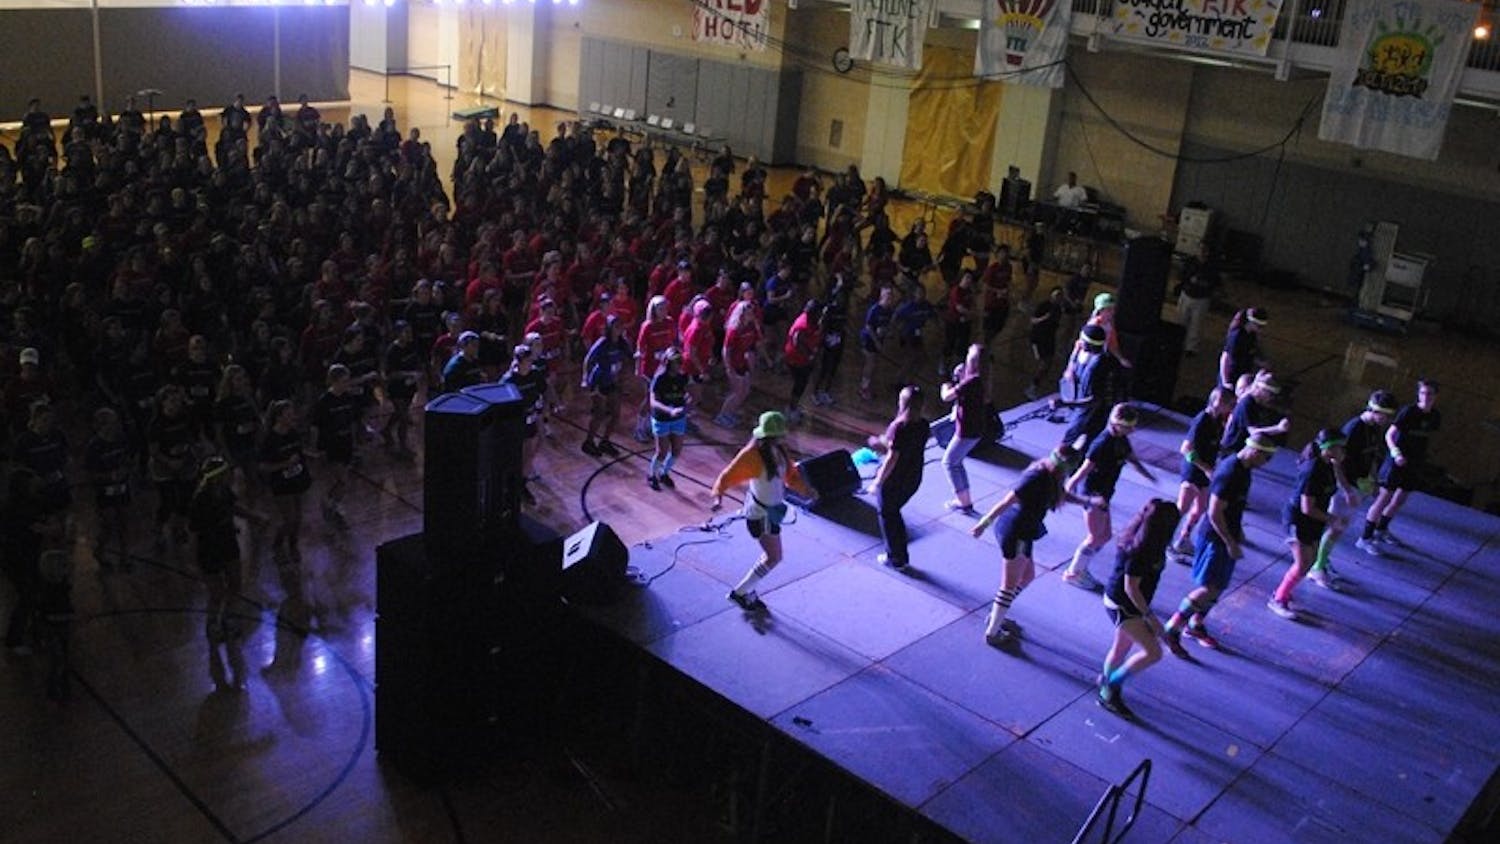 Hundreds dance through the night at USC’s Dance Marathon, which plans to expand this year.